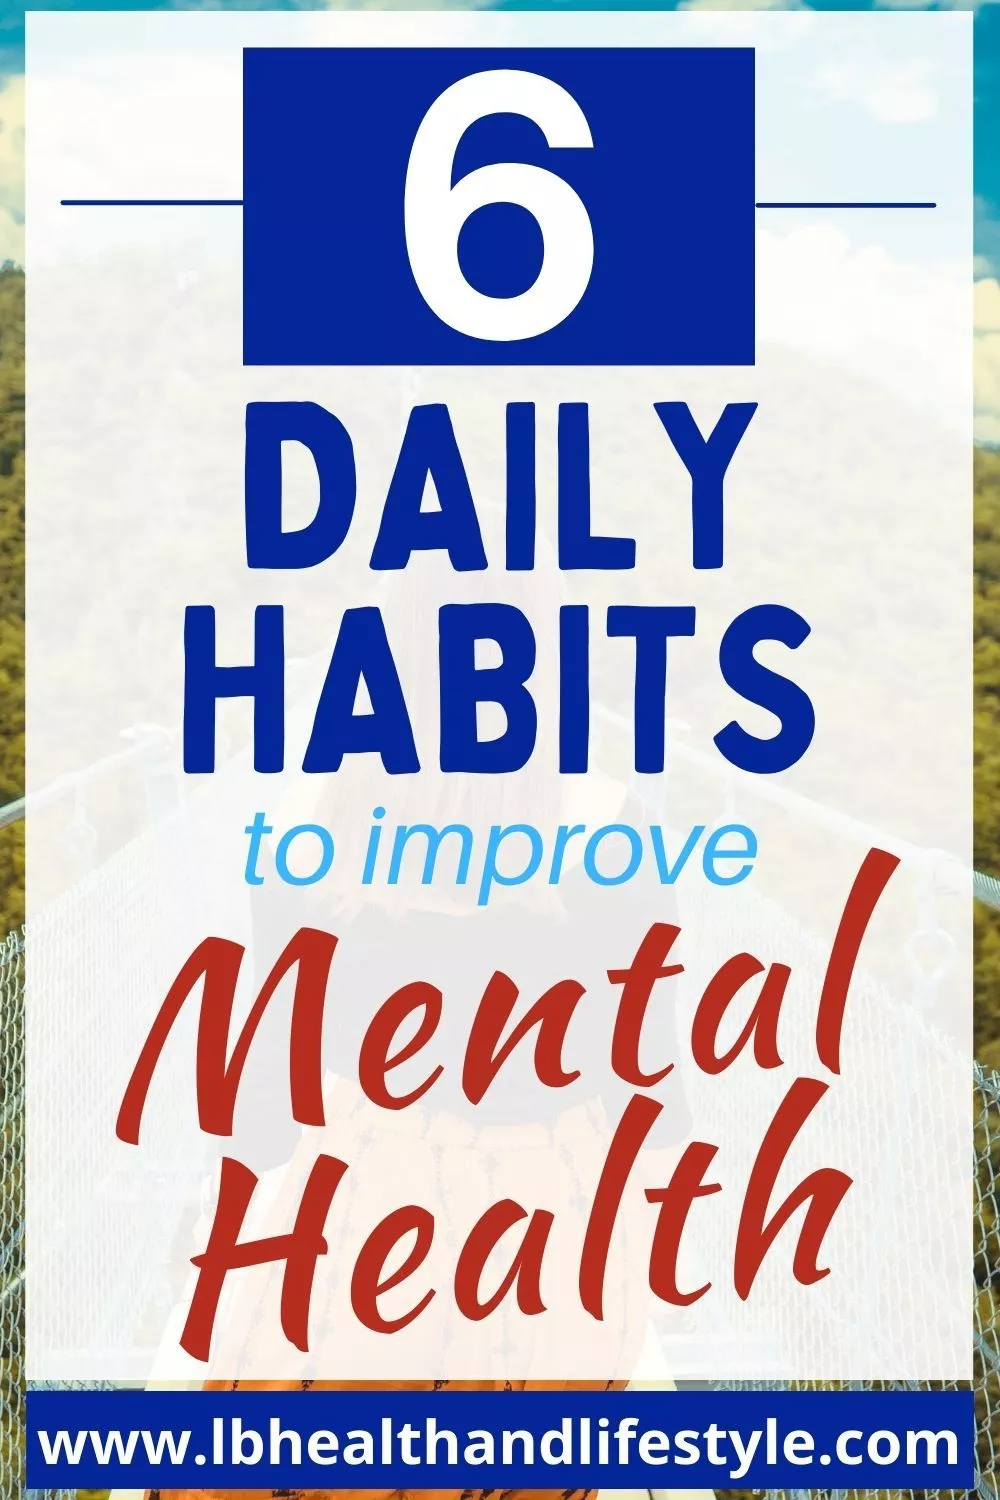 6 daily habits to improve mental health